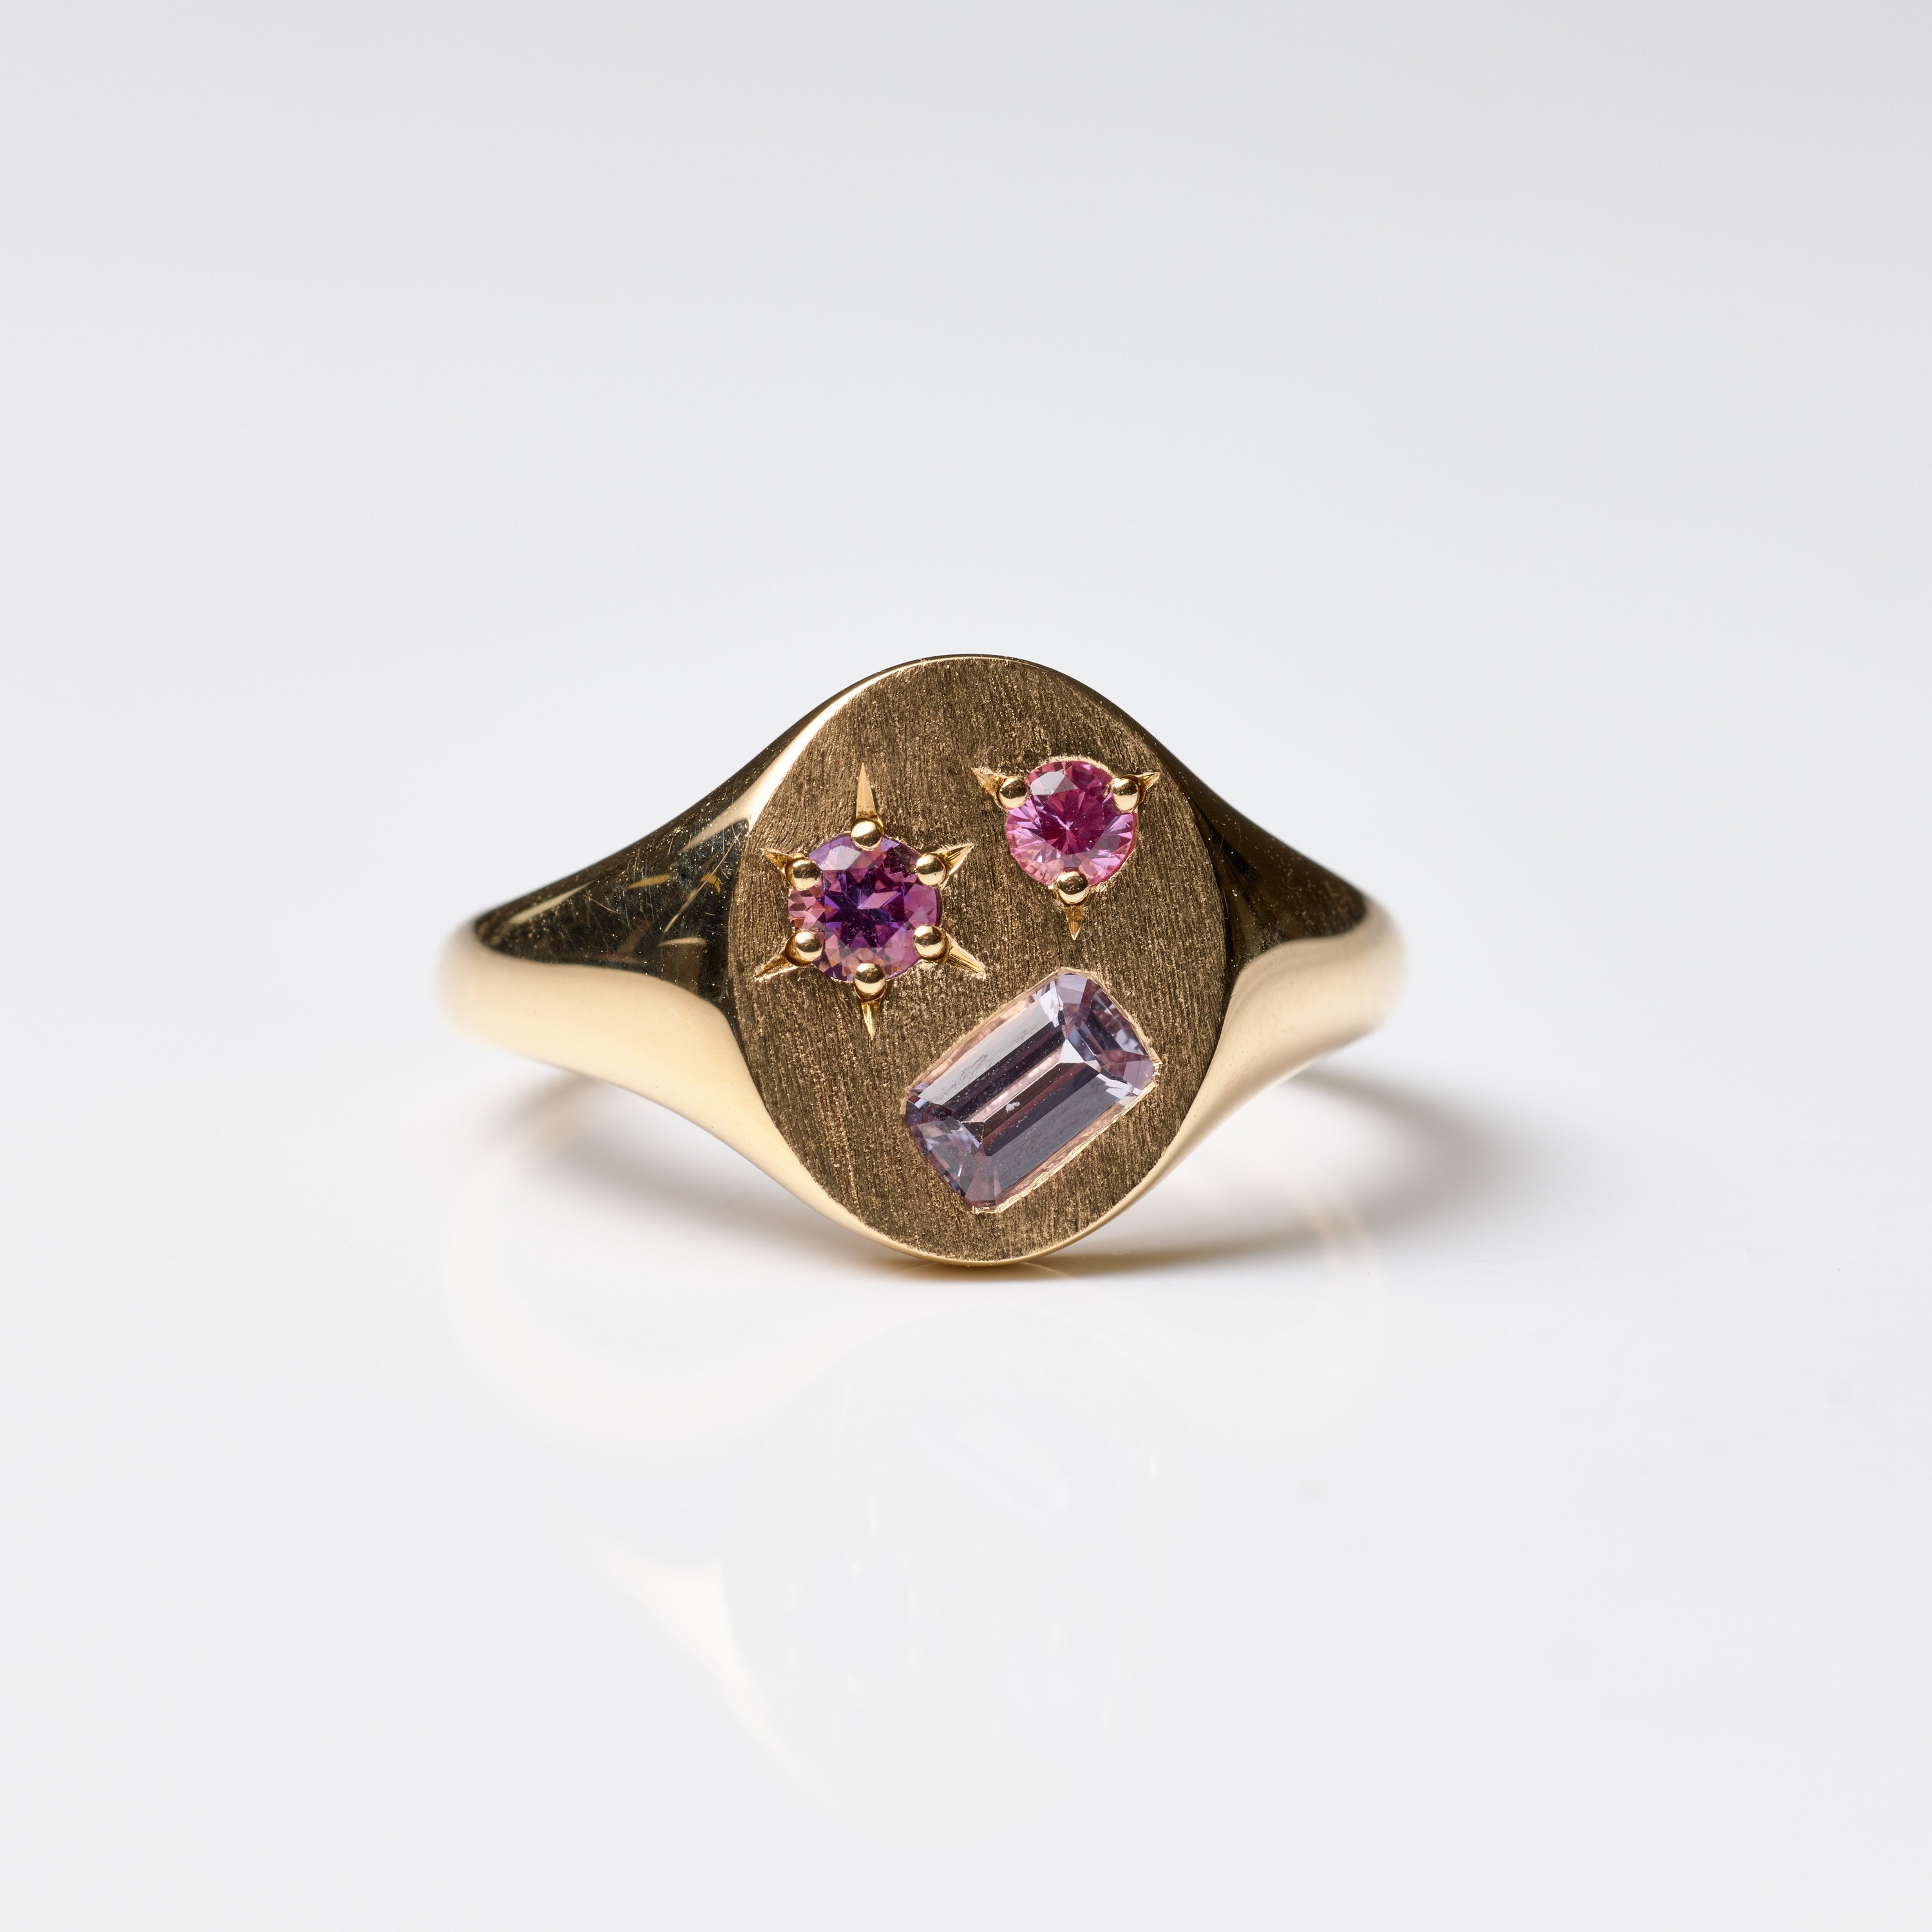 Stoned Signet Ring